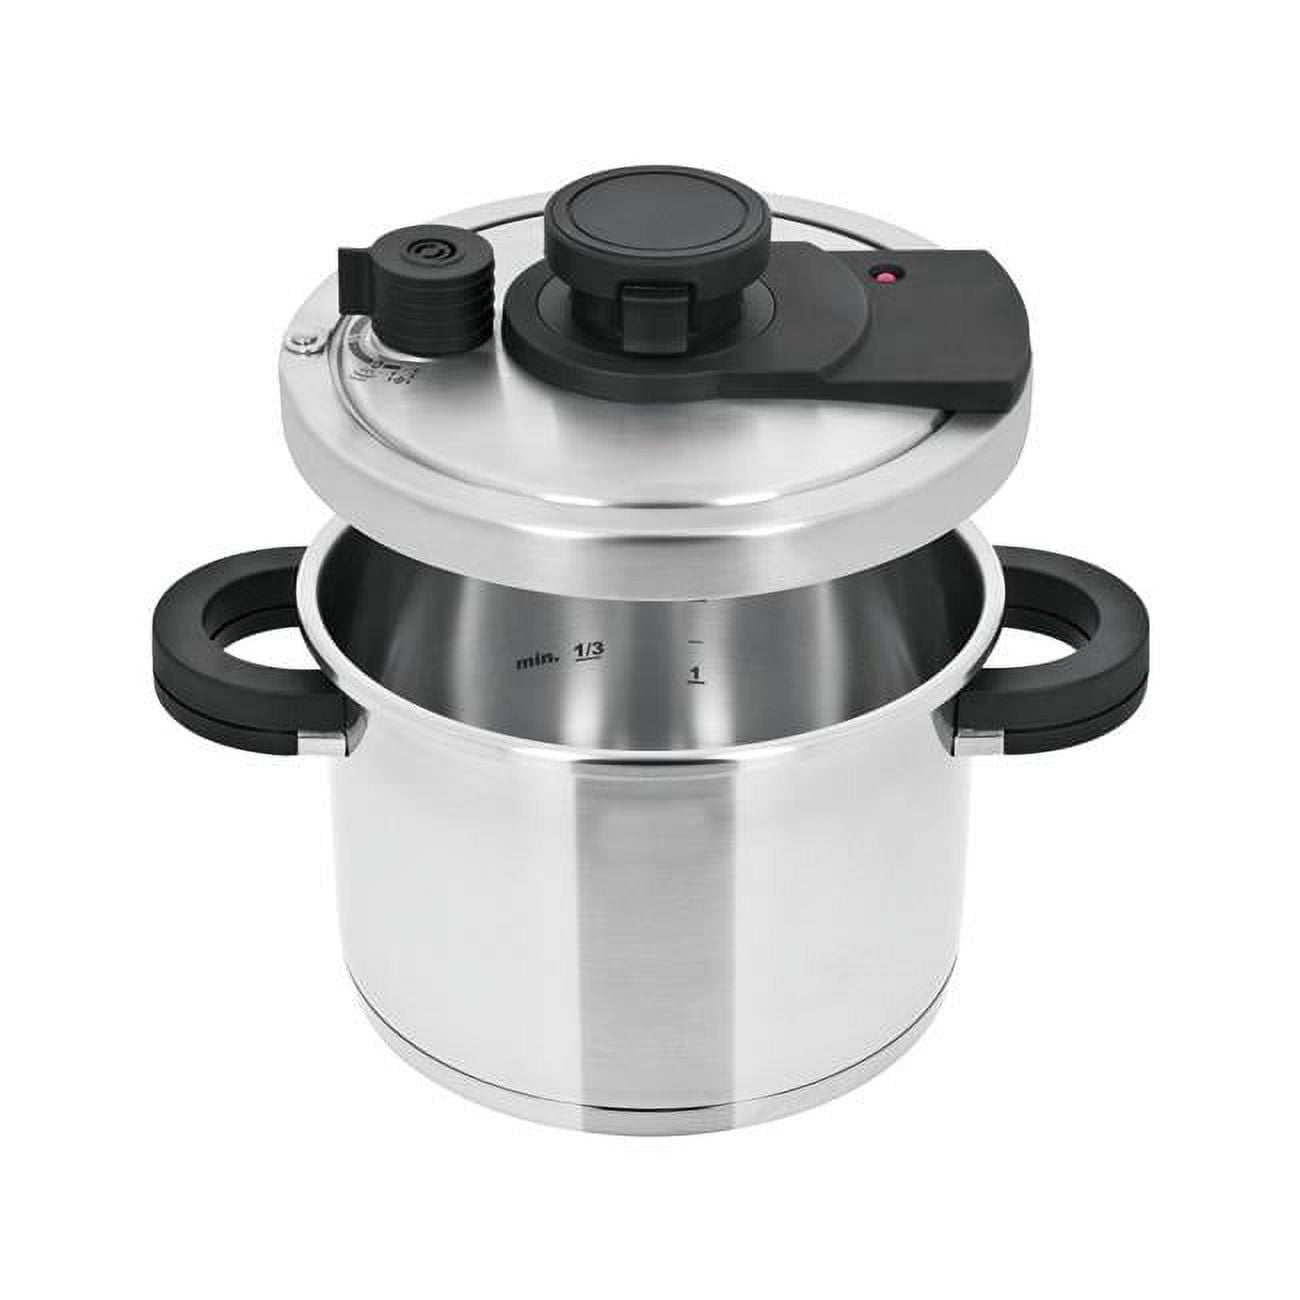 Barton Pressure Cooker Stovetop Turbo 8 Quart with Easy-Lock Lid  18/8-Stainless Steel 8QT, Recipe Book Fast Cooking Stove